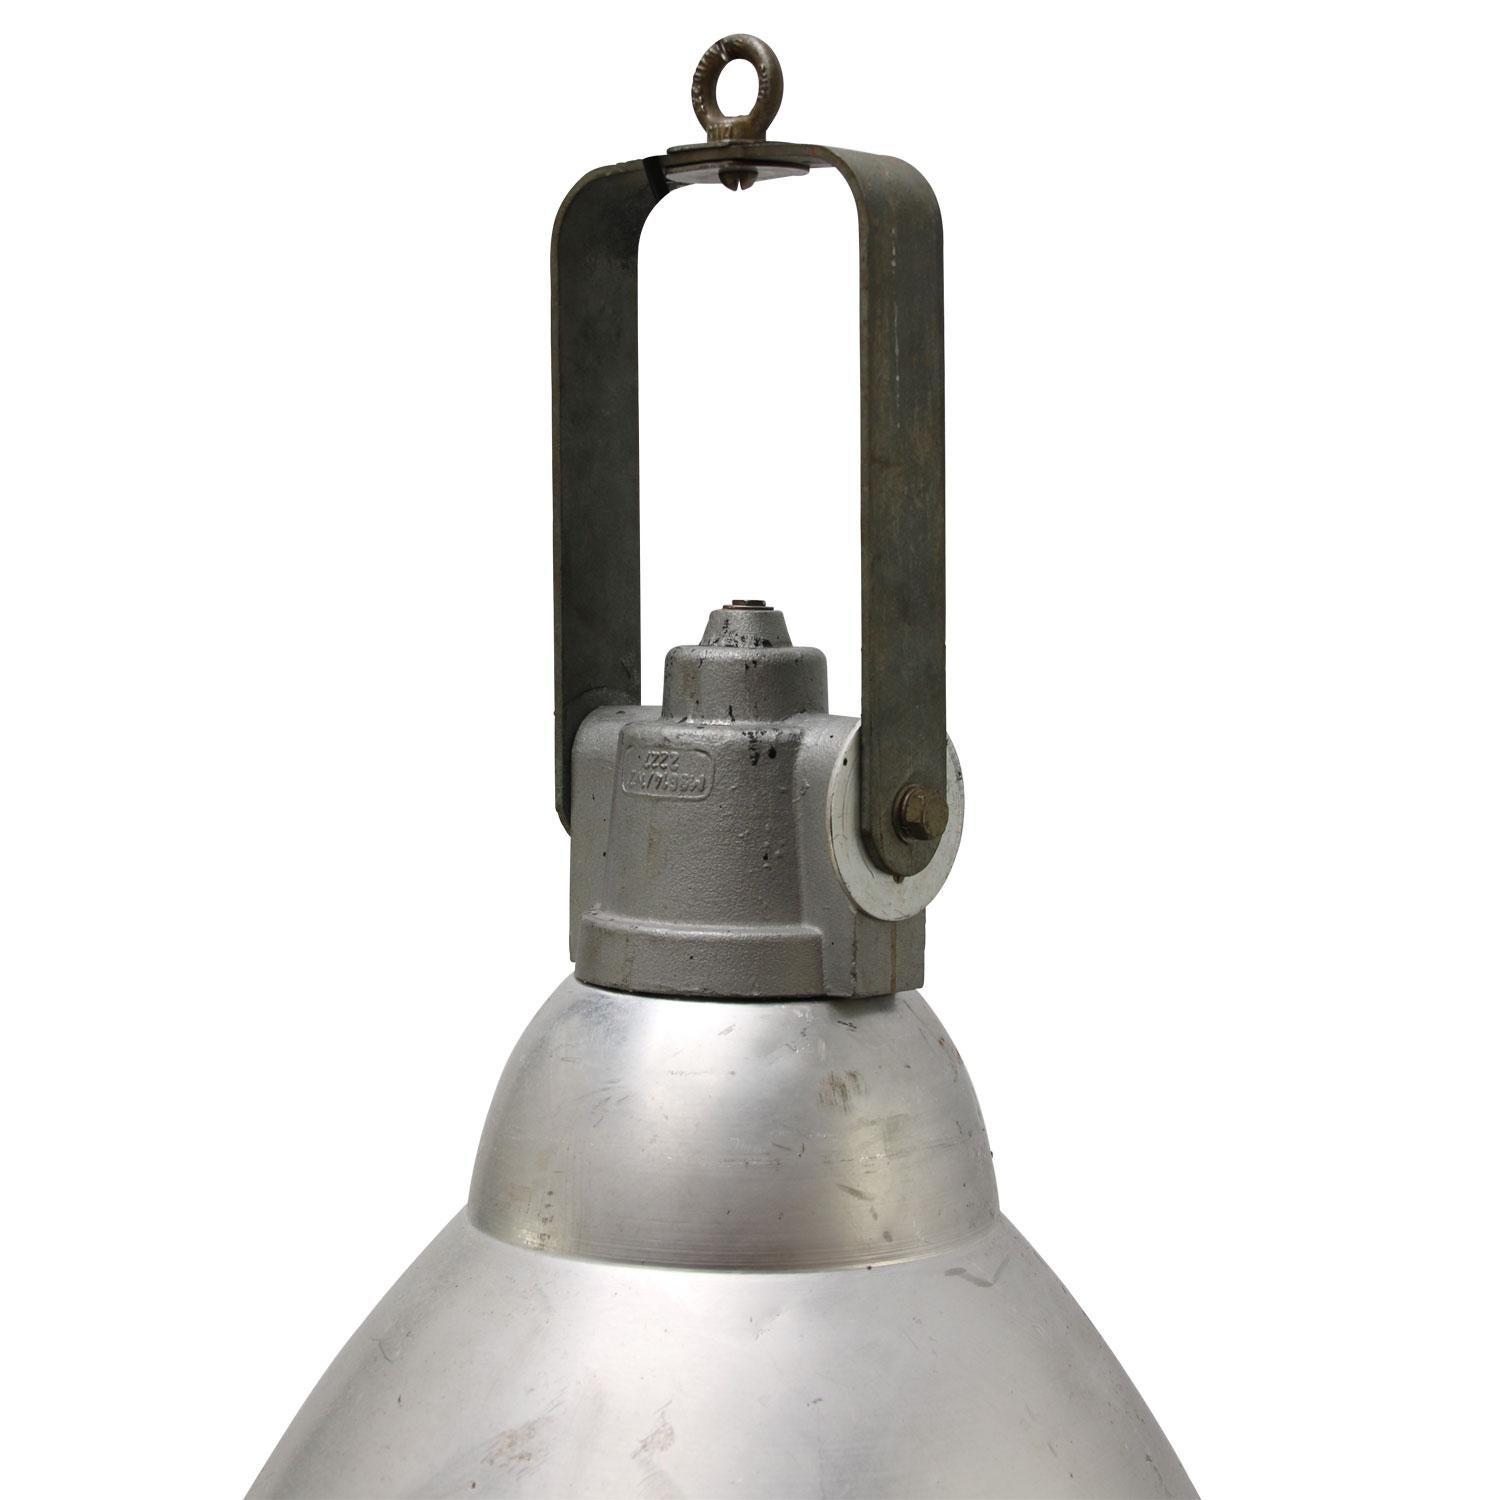 Industrial hanging pendant lamp.
Aluminum shade, cast iron top, clear glass.

Weight: 7.80 kg / 17.2 lb

Priced per individual item. All lamps have been made suitable by international standards for incandescent light bulbs, energy-efficient and